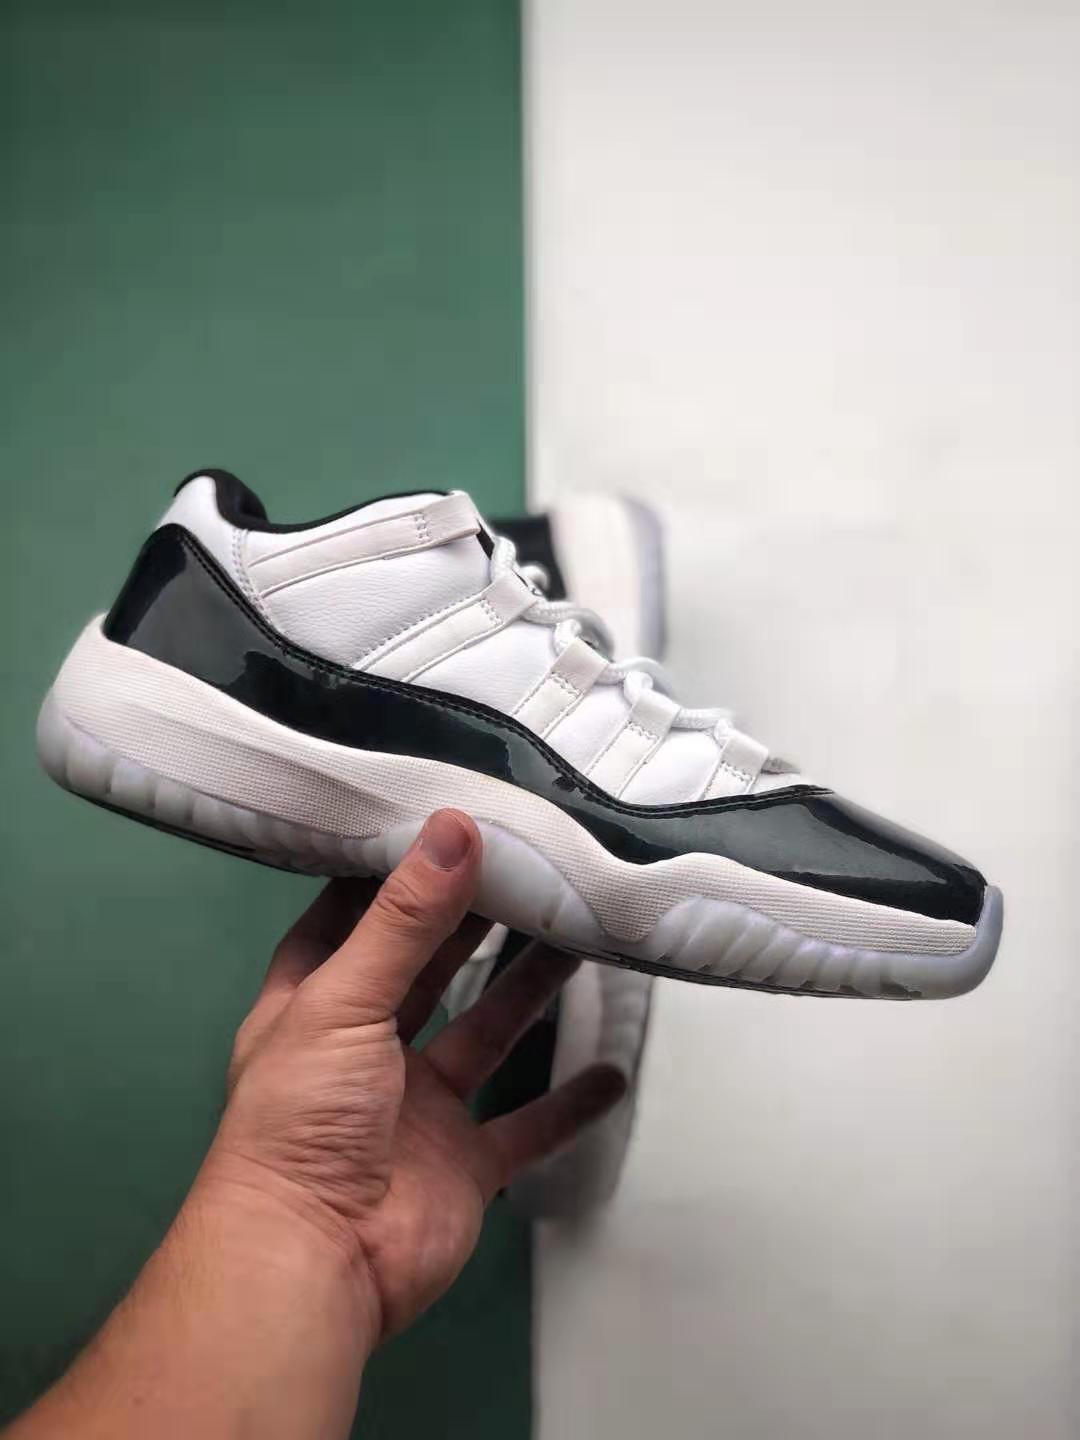 Air Jordan 11 Retro Low 'Emerald' 528895-145 - Stylish and Authentic Sneakers for Sale